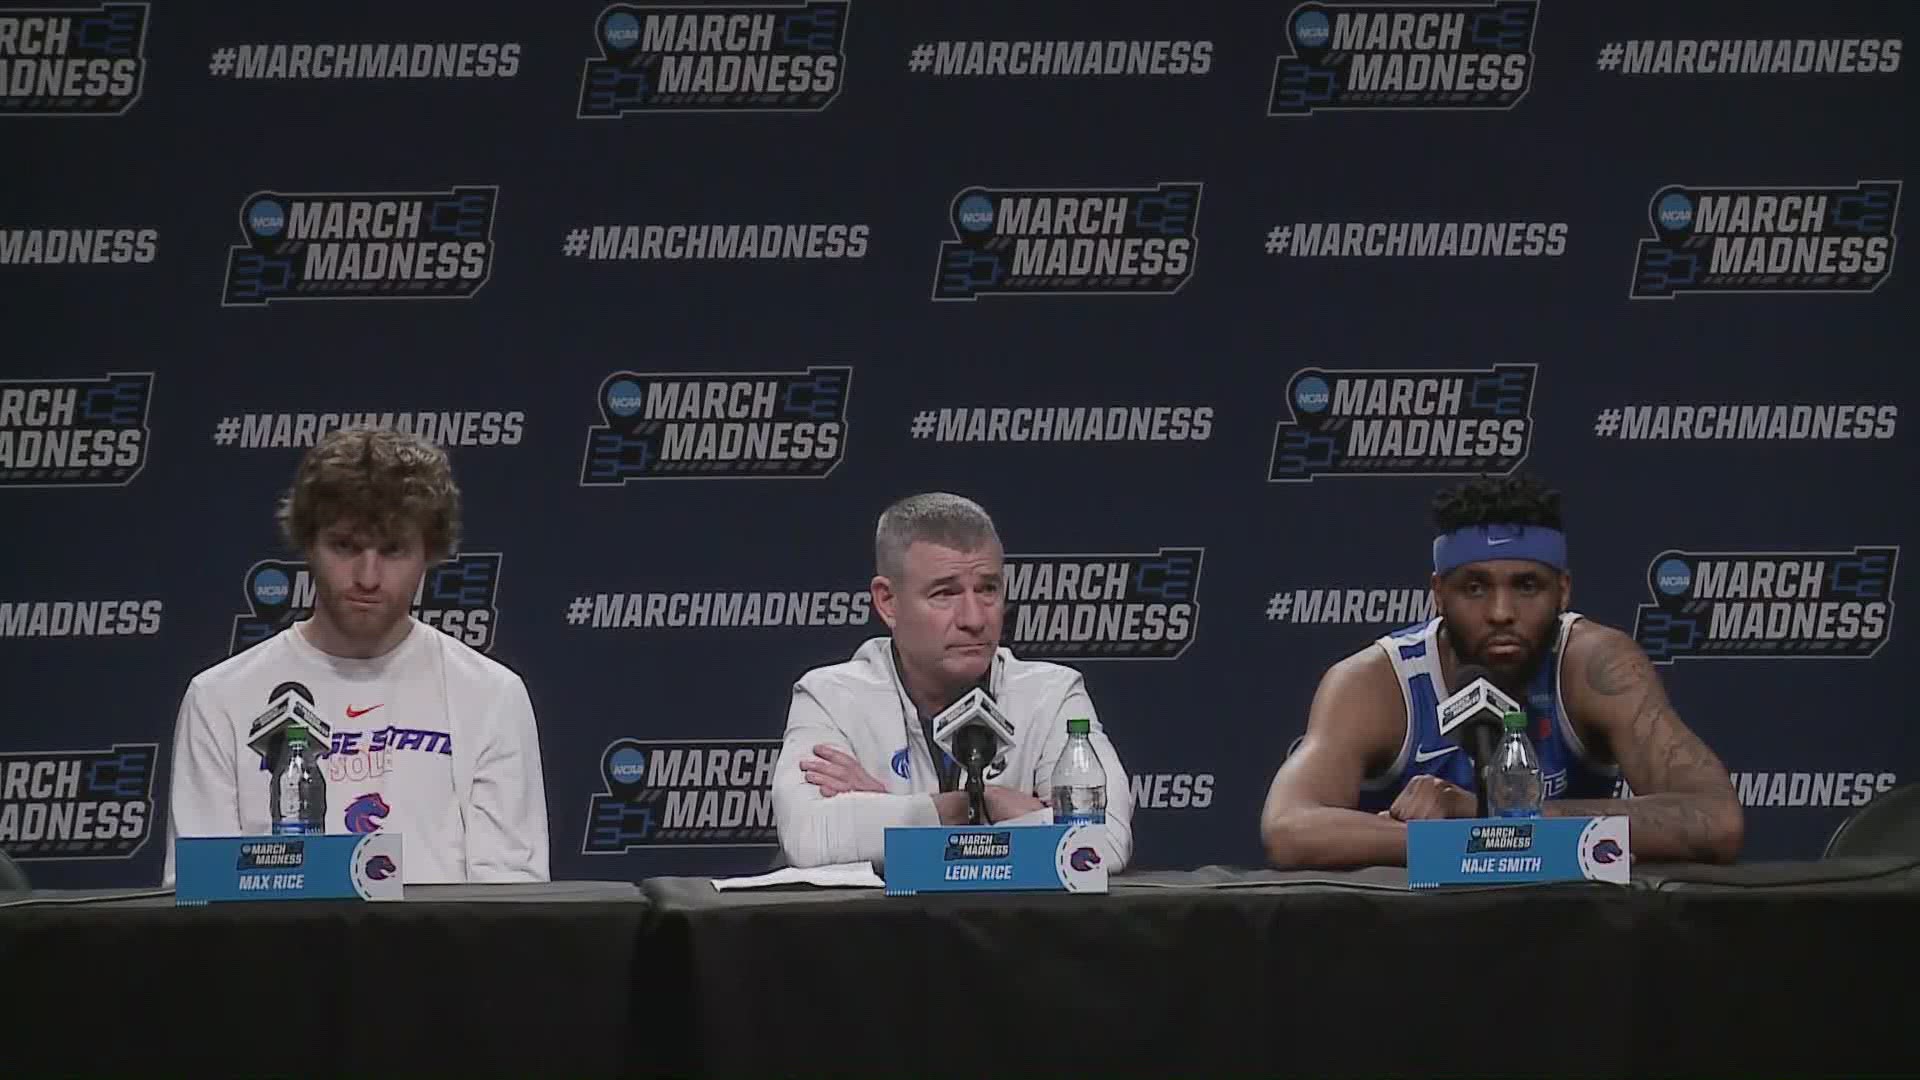 Hear from an emotional Leon Rice, Max Rice and Naje Smith following Thursday's 75-67 loss to Northwestern in the first round of the NCAA Tournament.